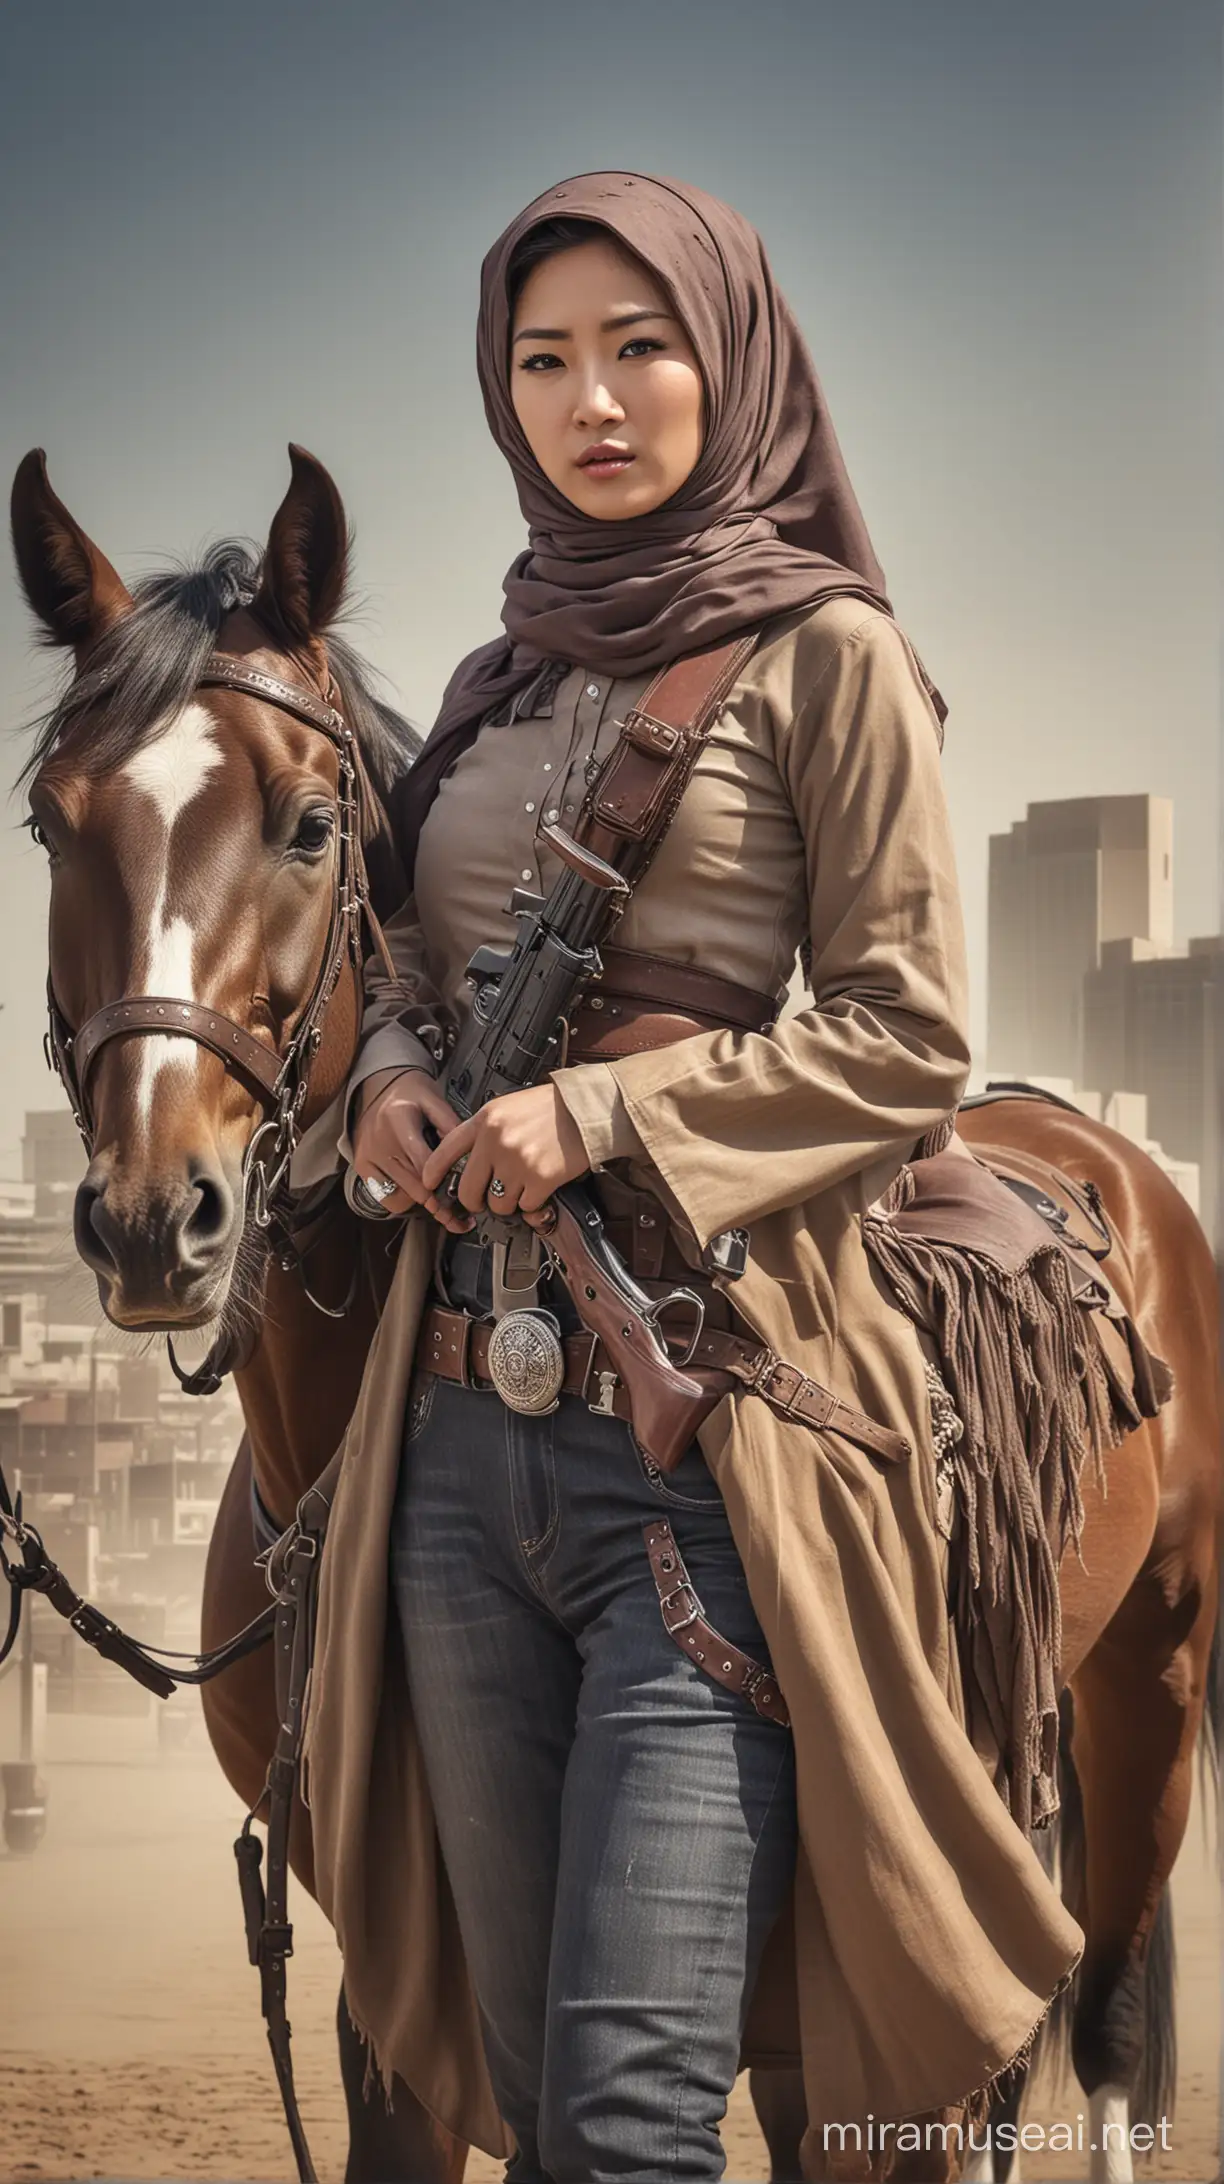 Korean Cowgirl with Dual Shotguns Poses by Horse in Texas Cityscape